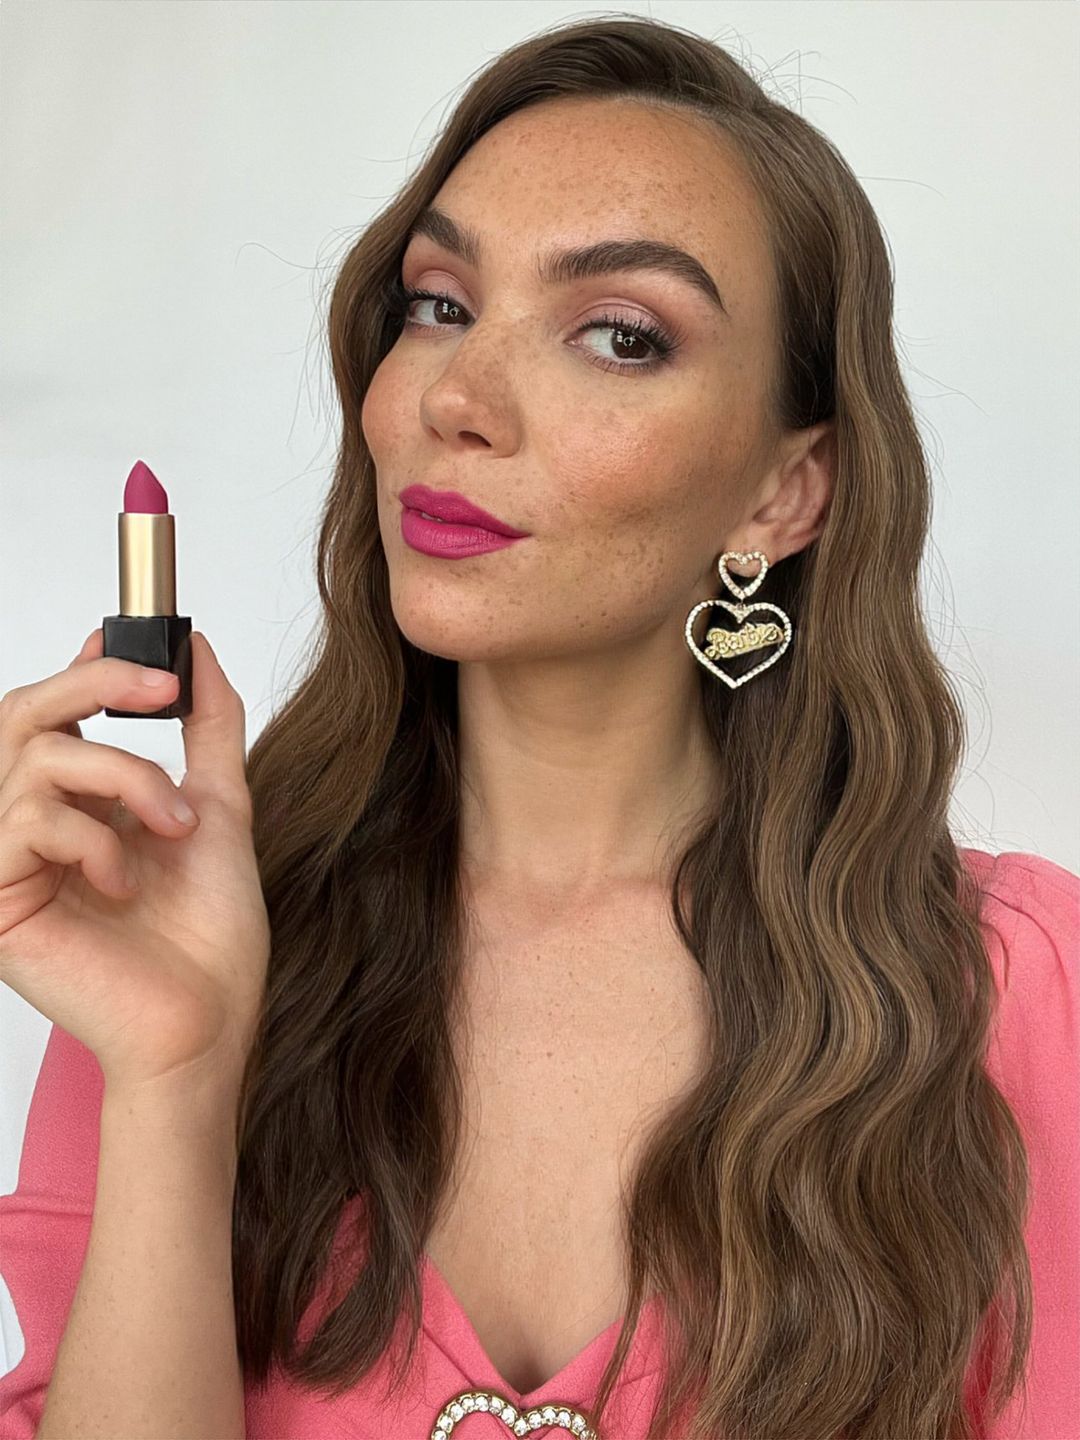 Makeup artist yasmin salmon holds a pink lipstick for a barbie inspired beauty look